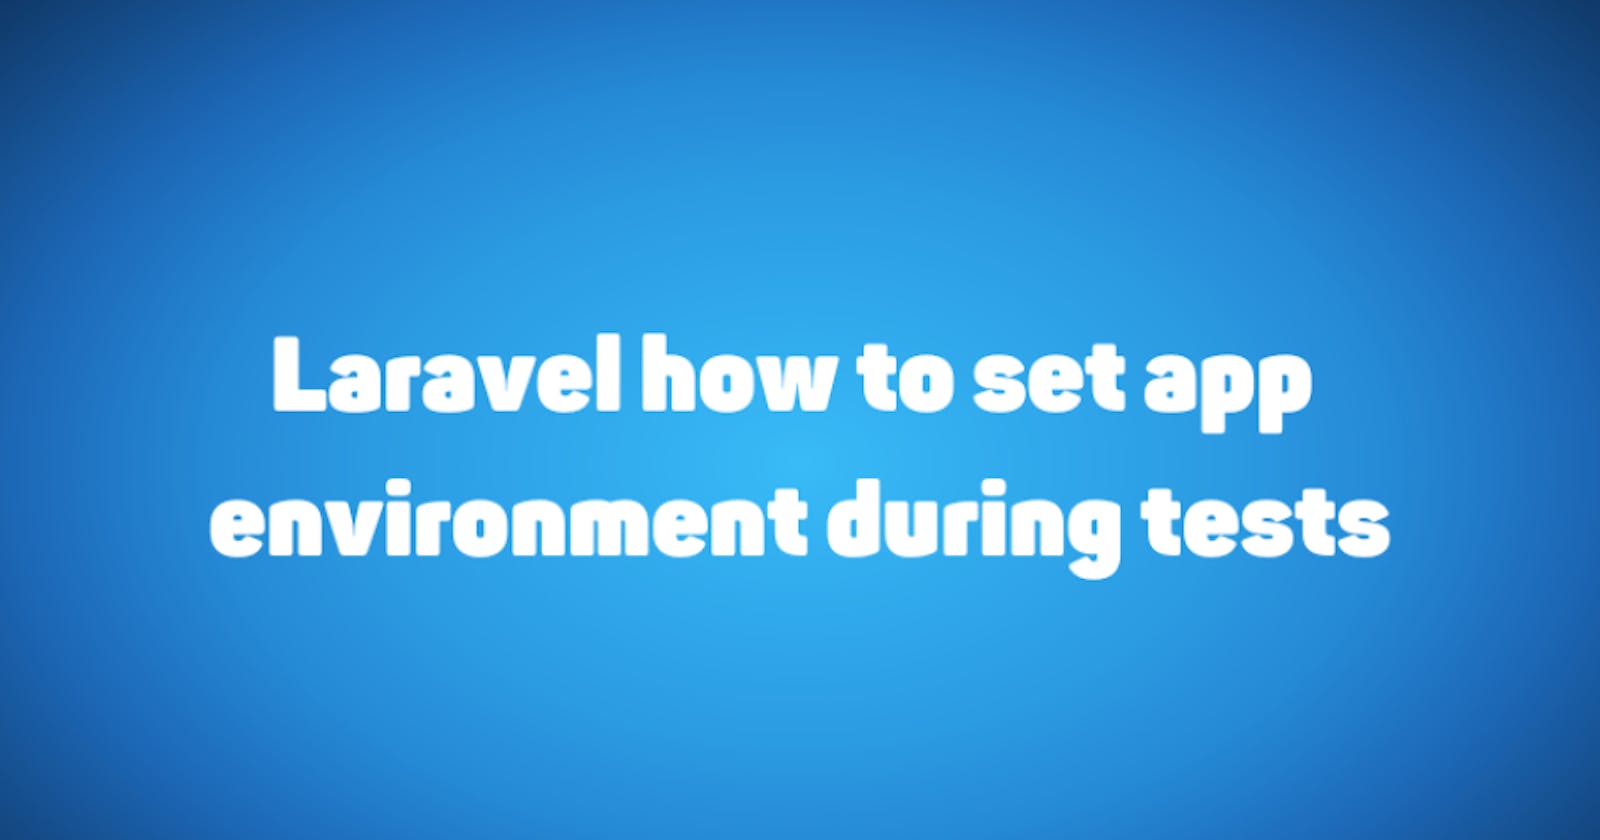 Laravel how to set app environment during tests